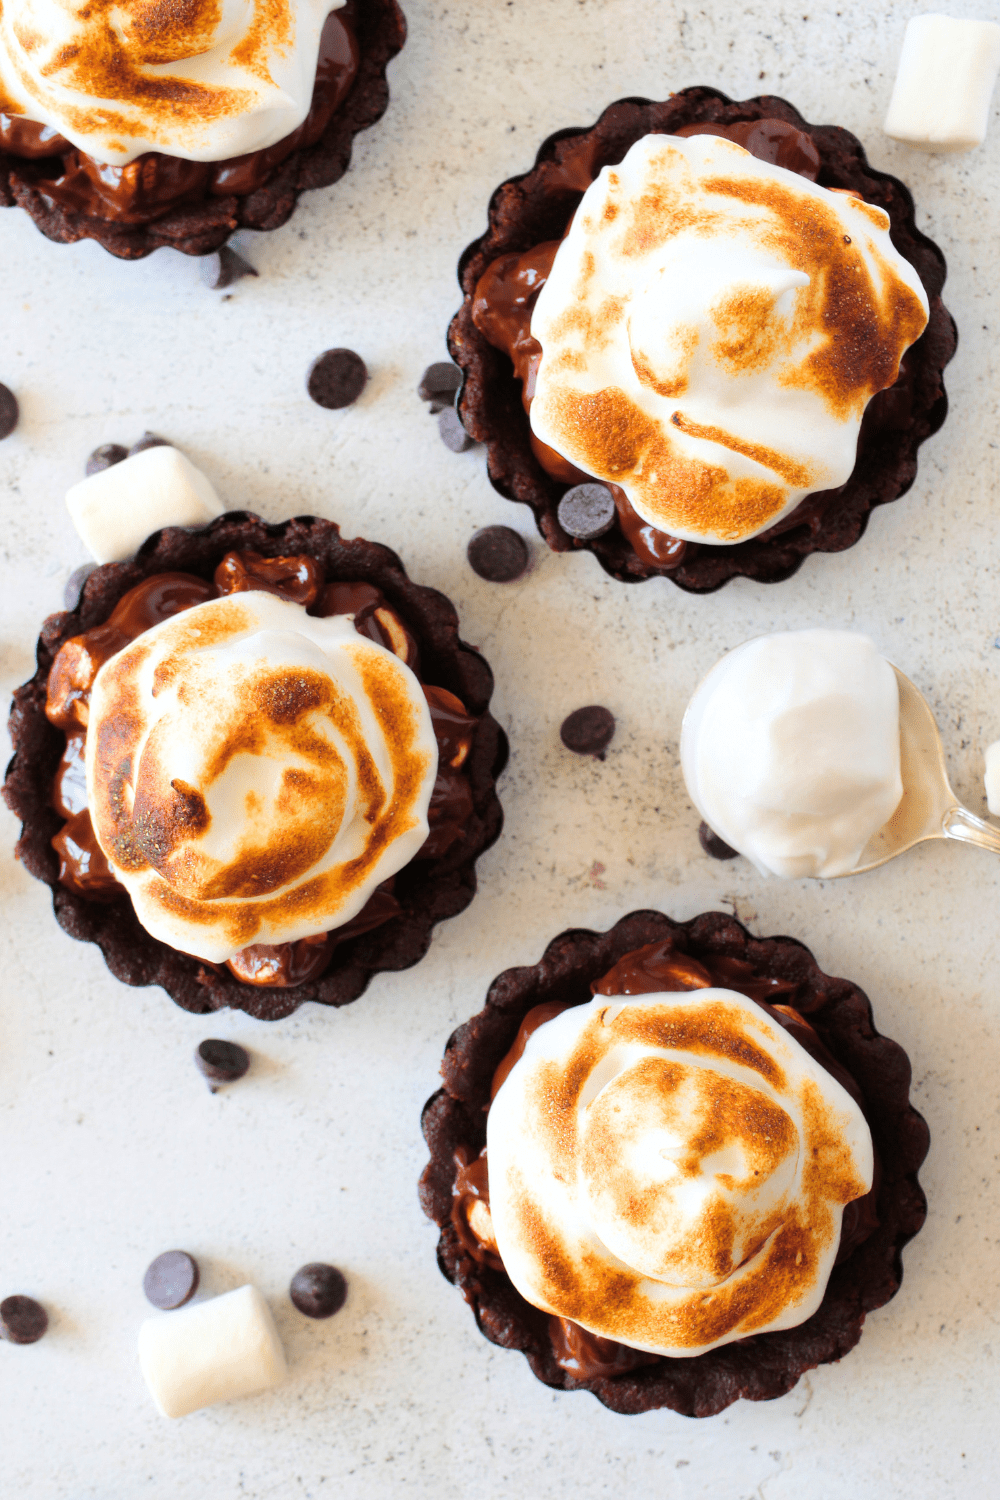 top view of 4 mini no-bake keto pies with chocolate filling and sugar-free marshmallows